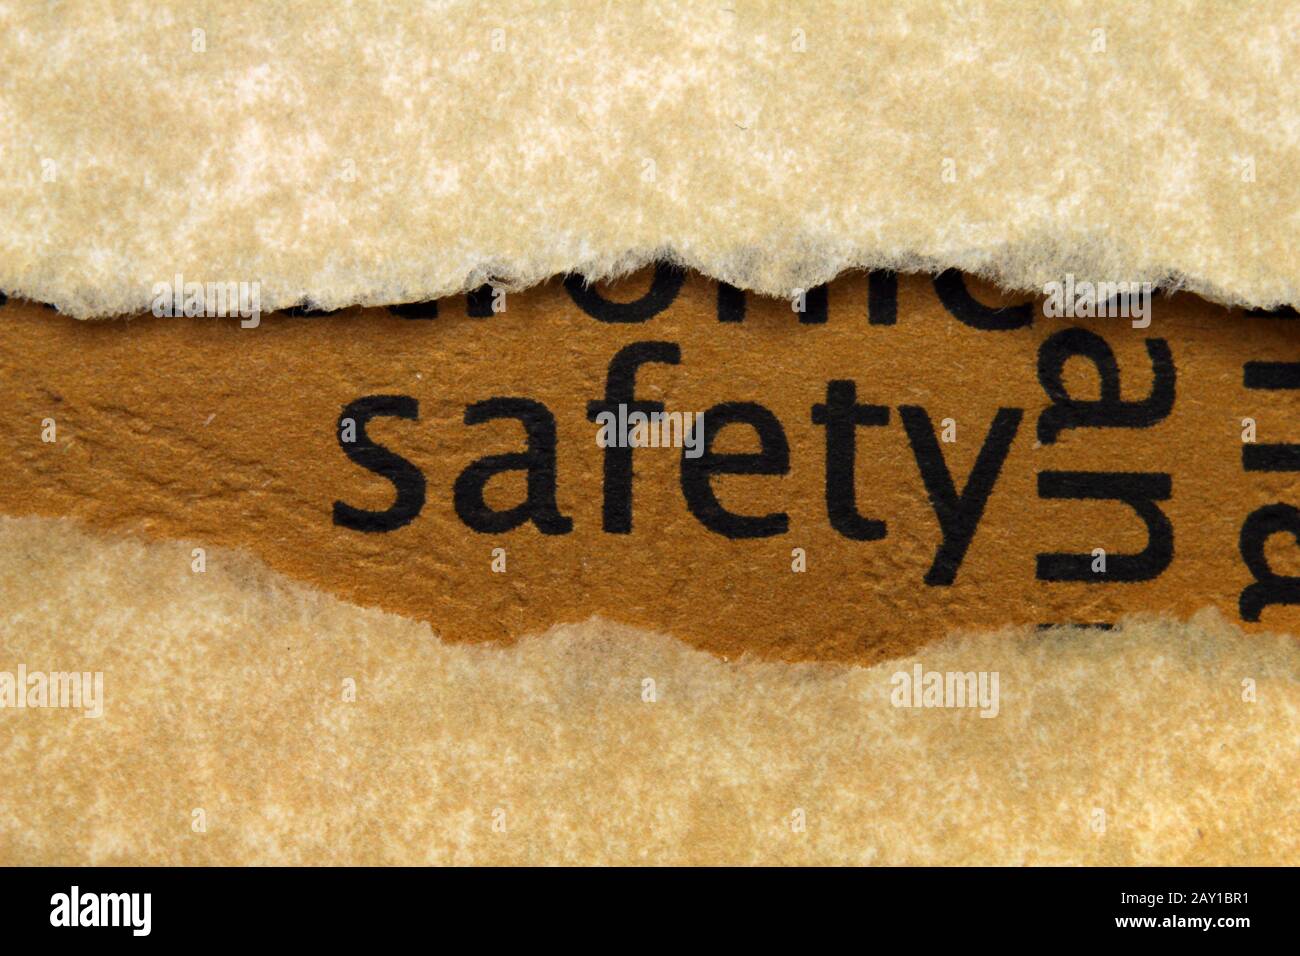 Safety concept Stock Photo